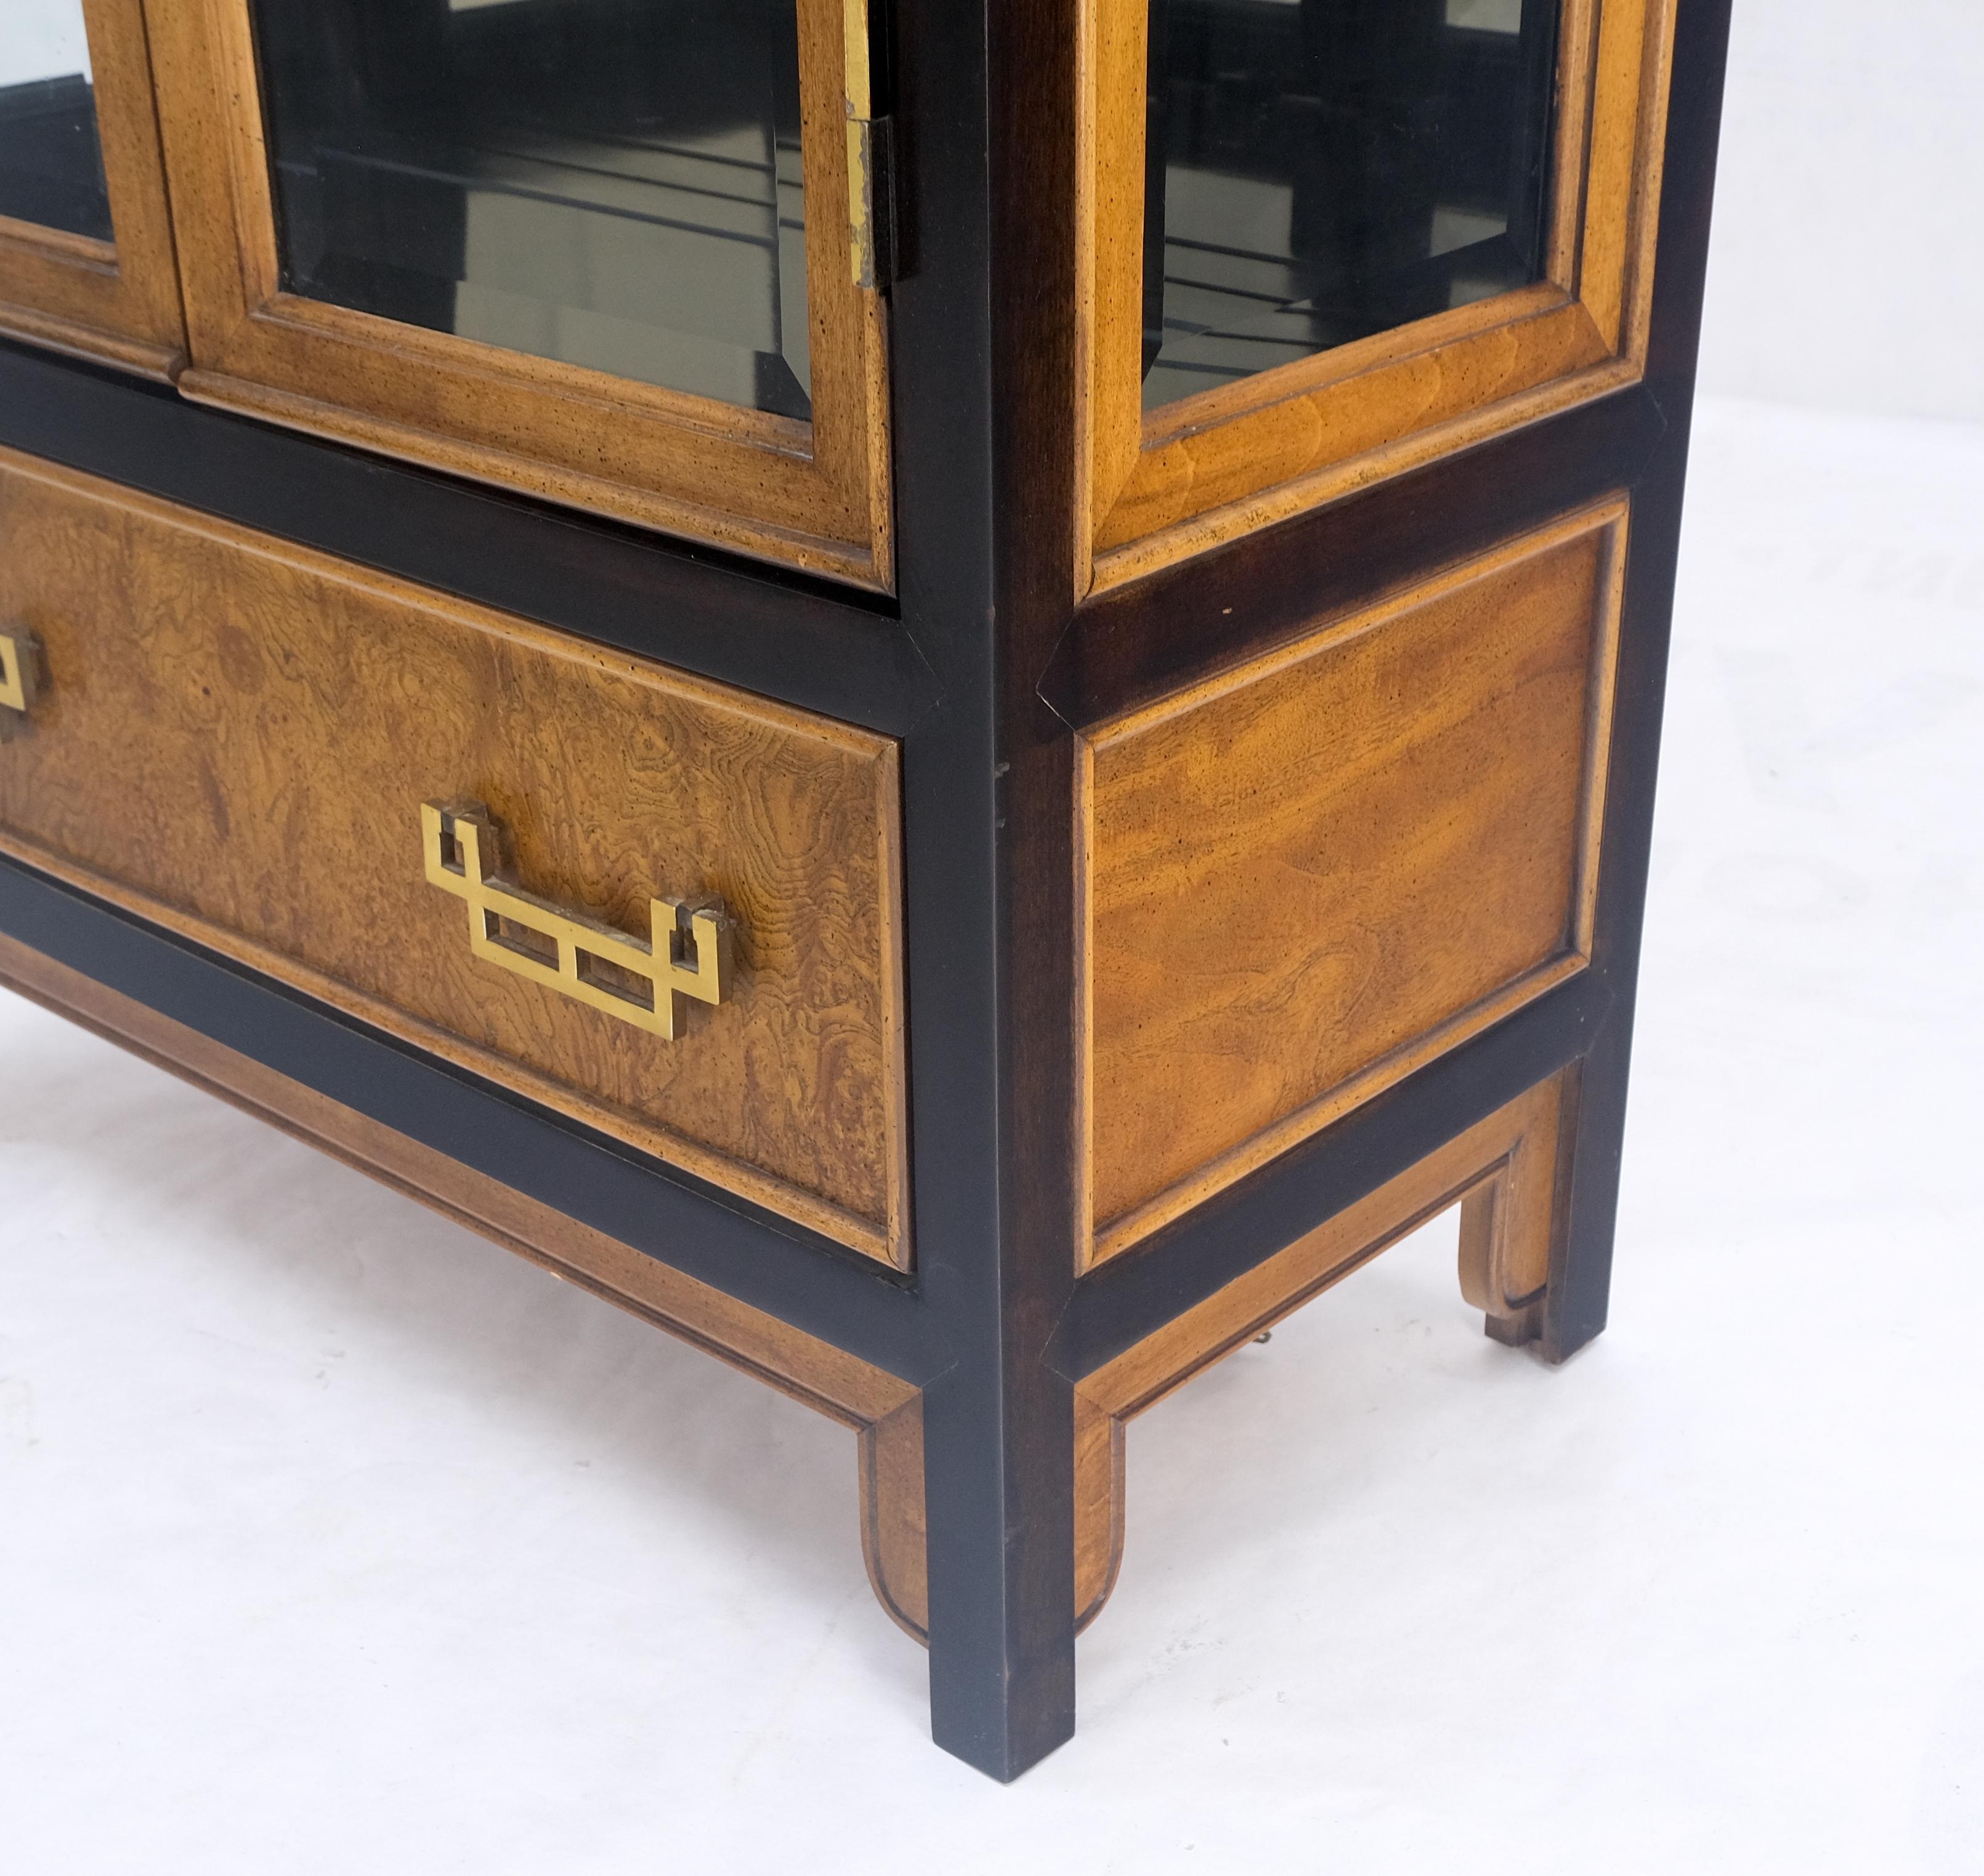 Lacquered Double Doors Tall Narrow Glass Shelves Burl Wood Black Lacquer Vitrine Wall Unit